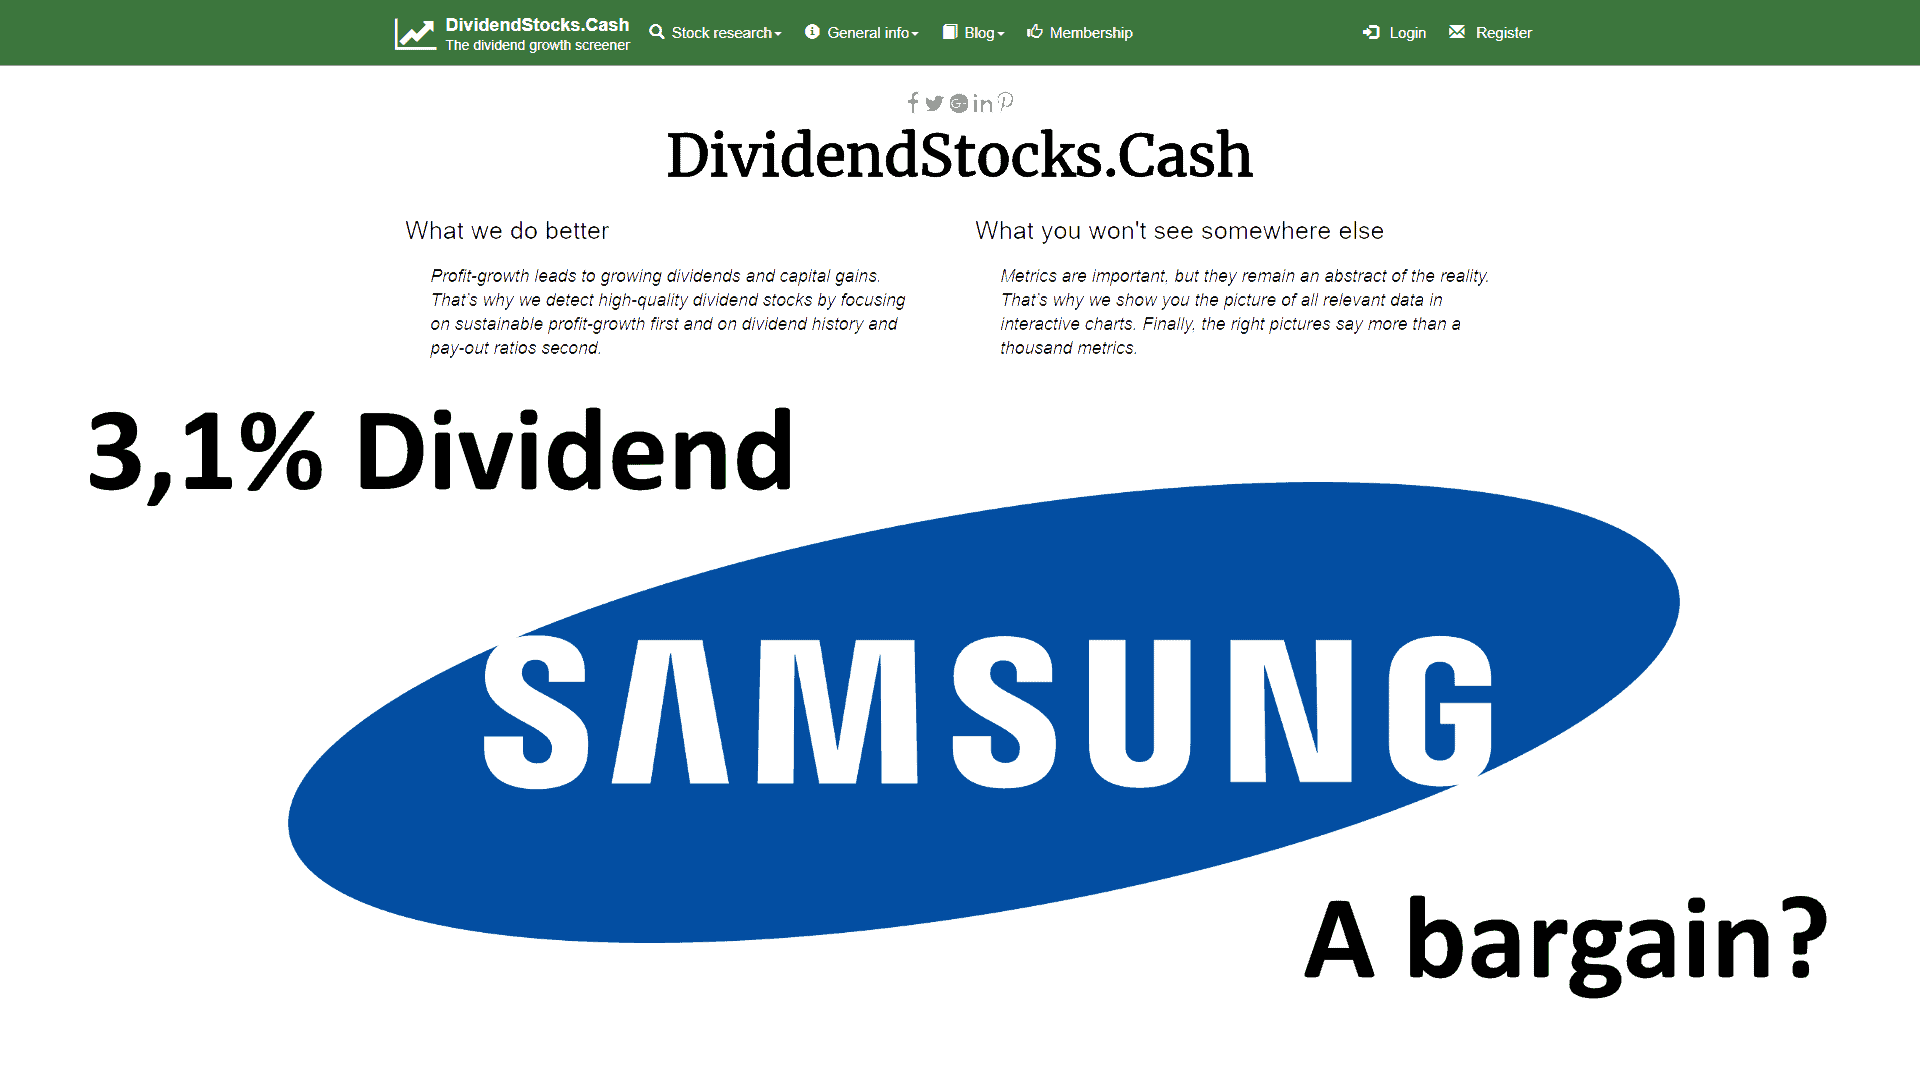 Samsung Tech giant with 3.1 dividend yield as a bargain